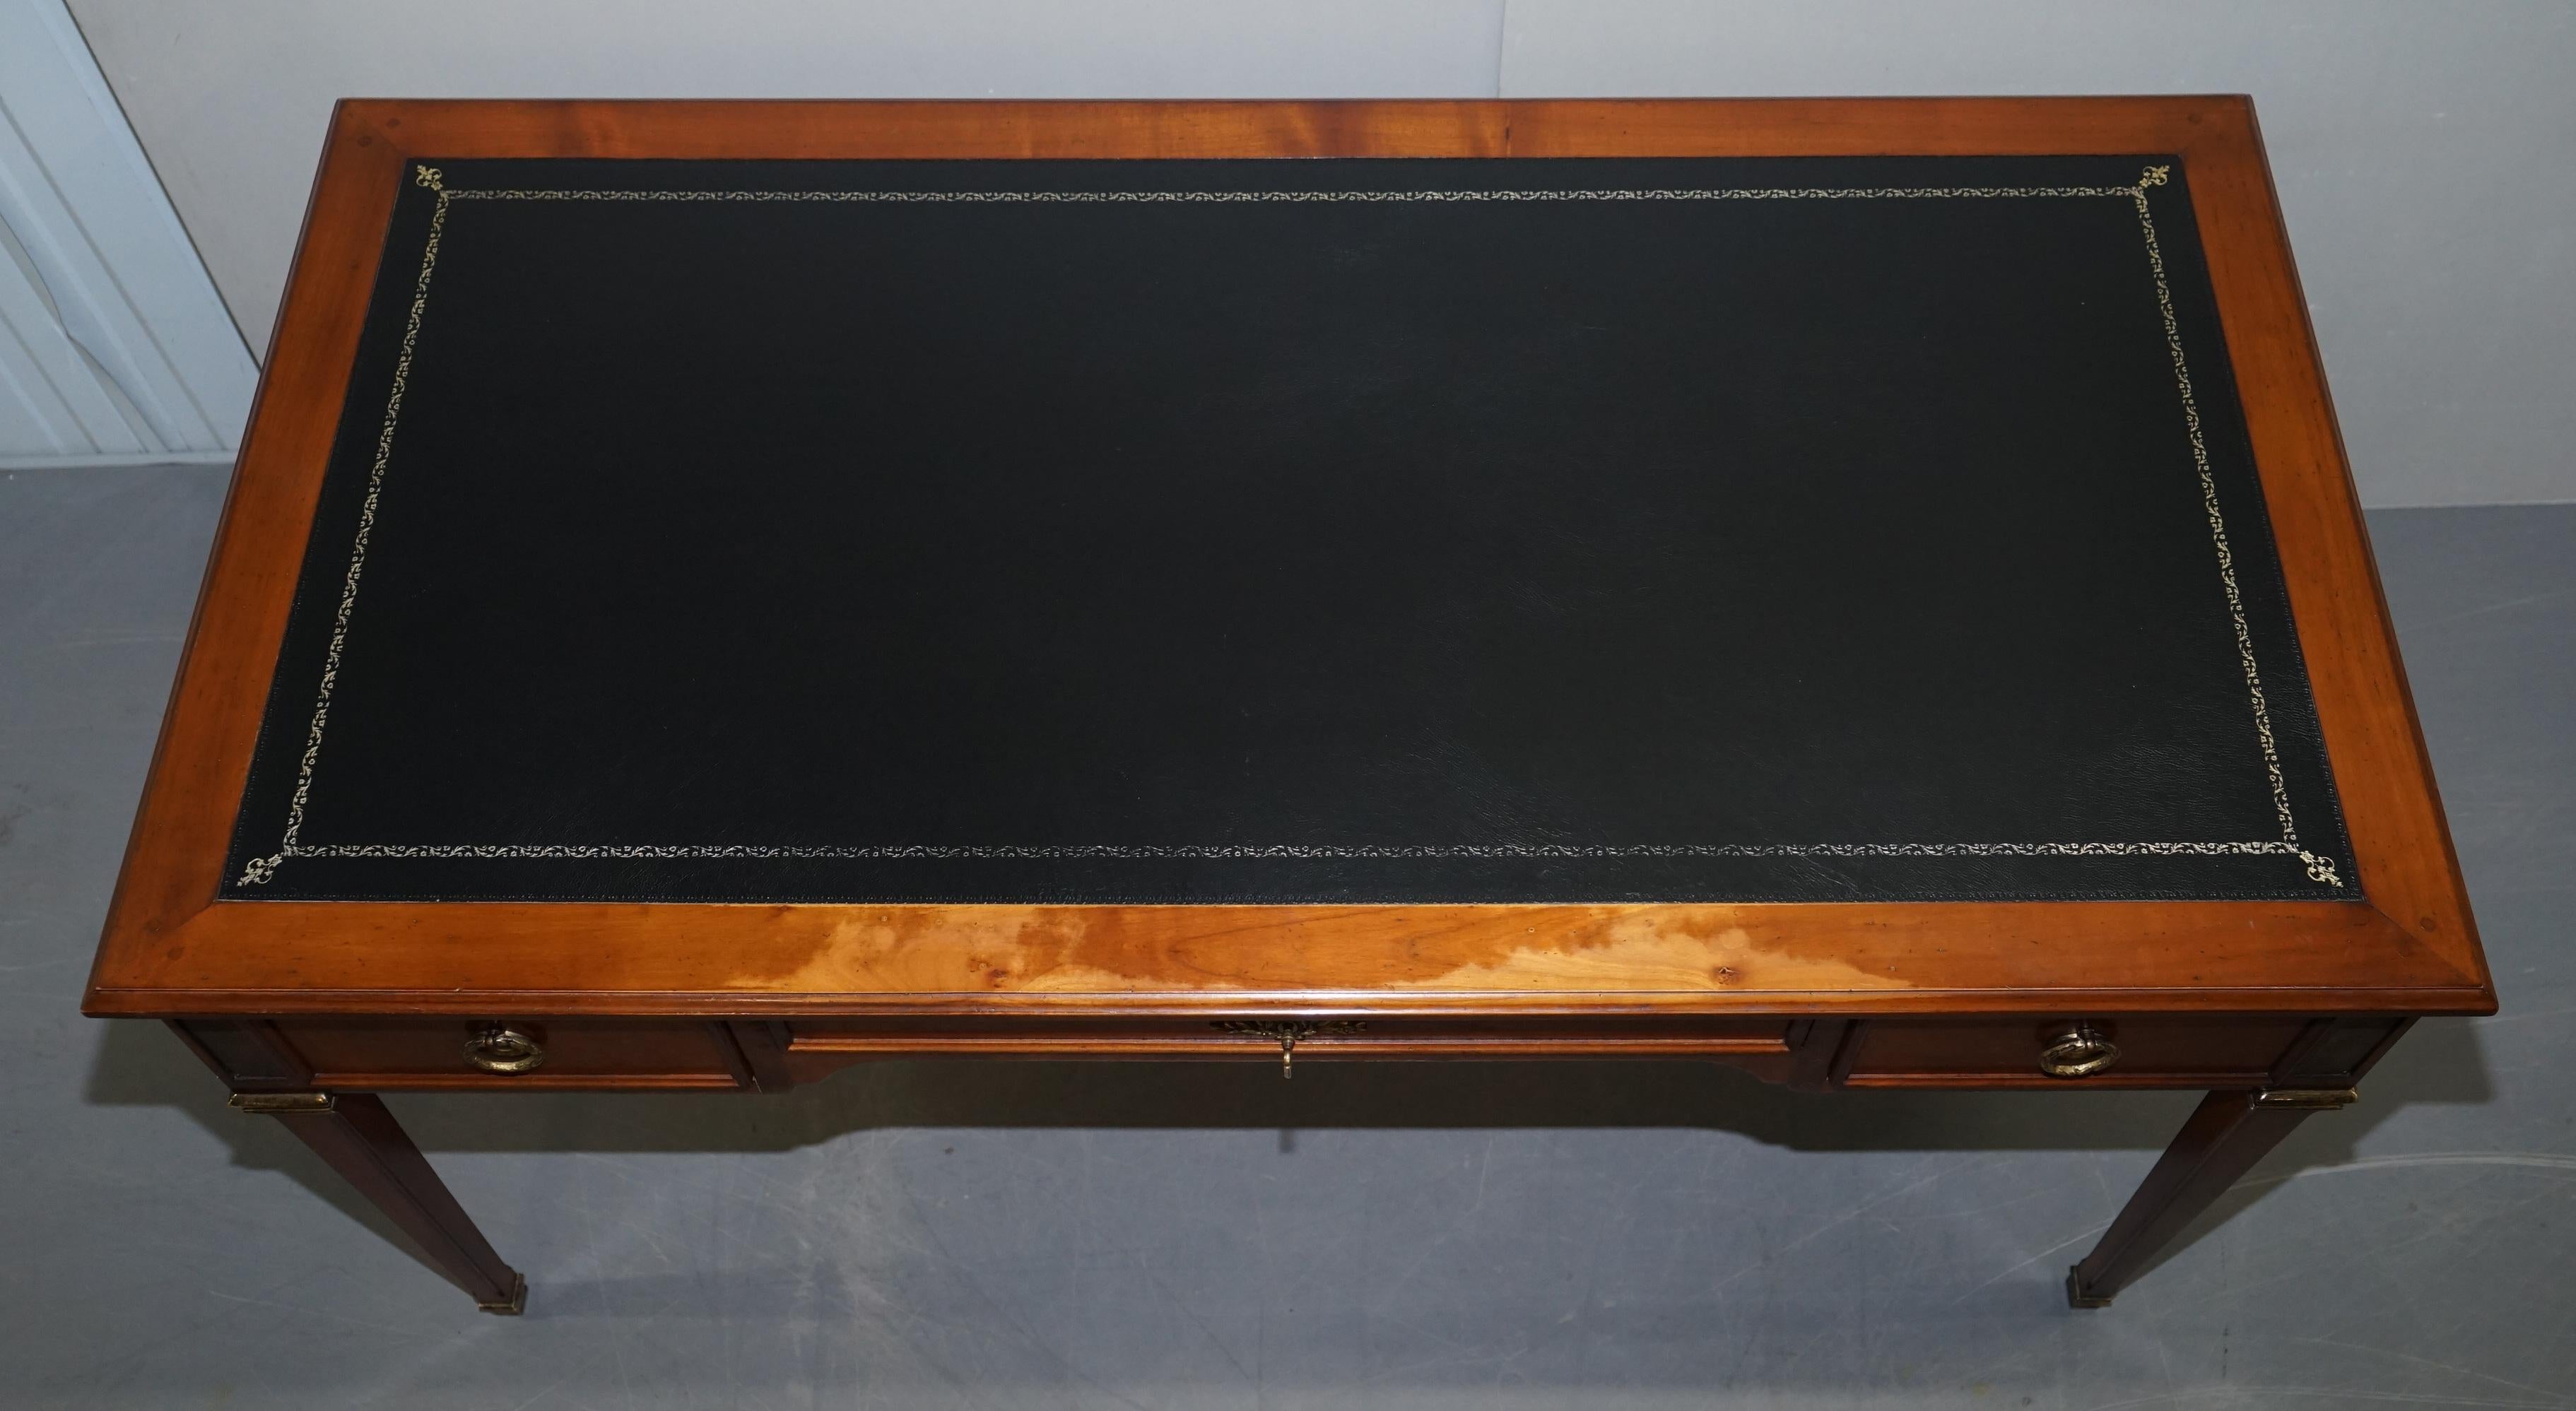 Hand-Crafted Vintage Fruitwood Leather Topped Extending Bureau De Plat Desk Writing Table